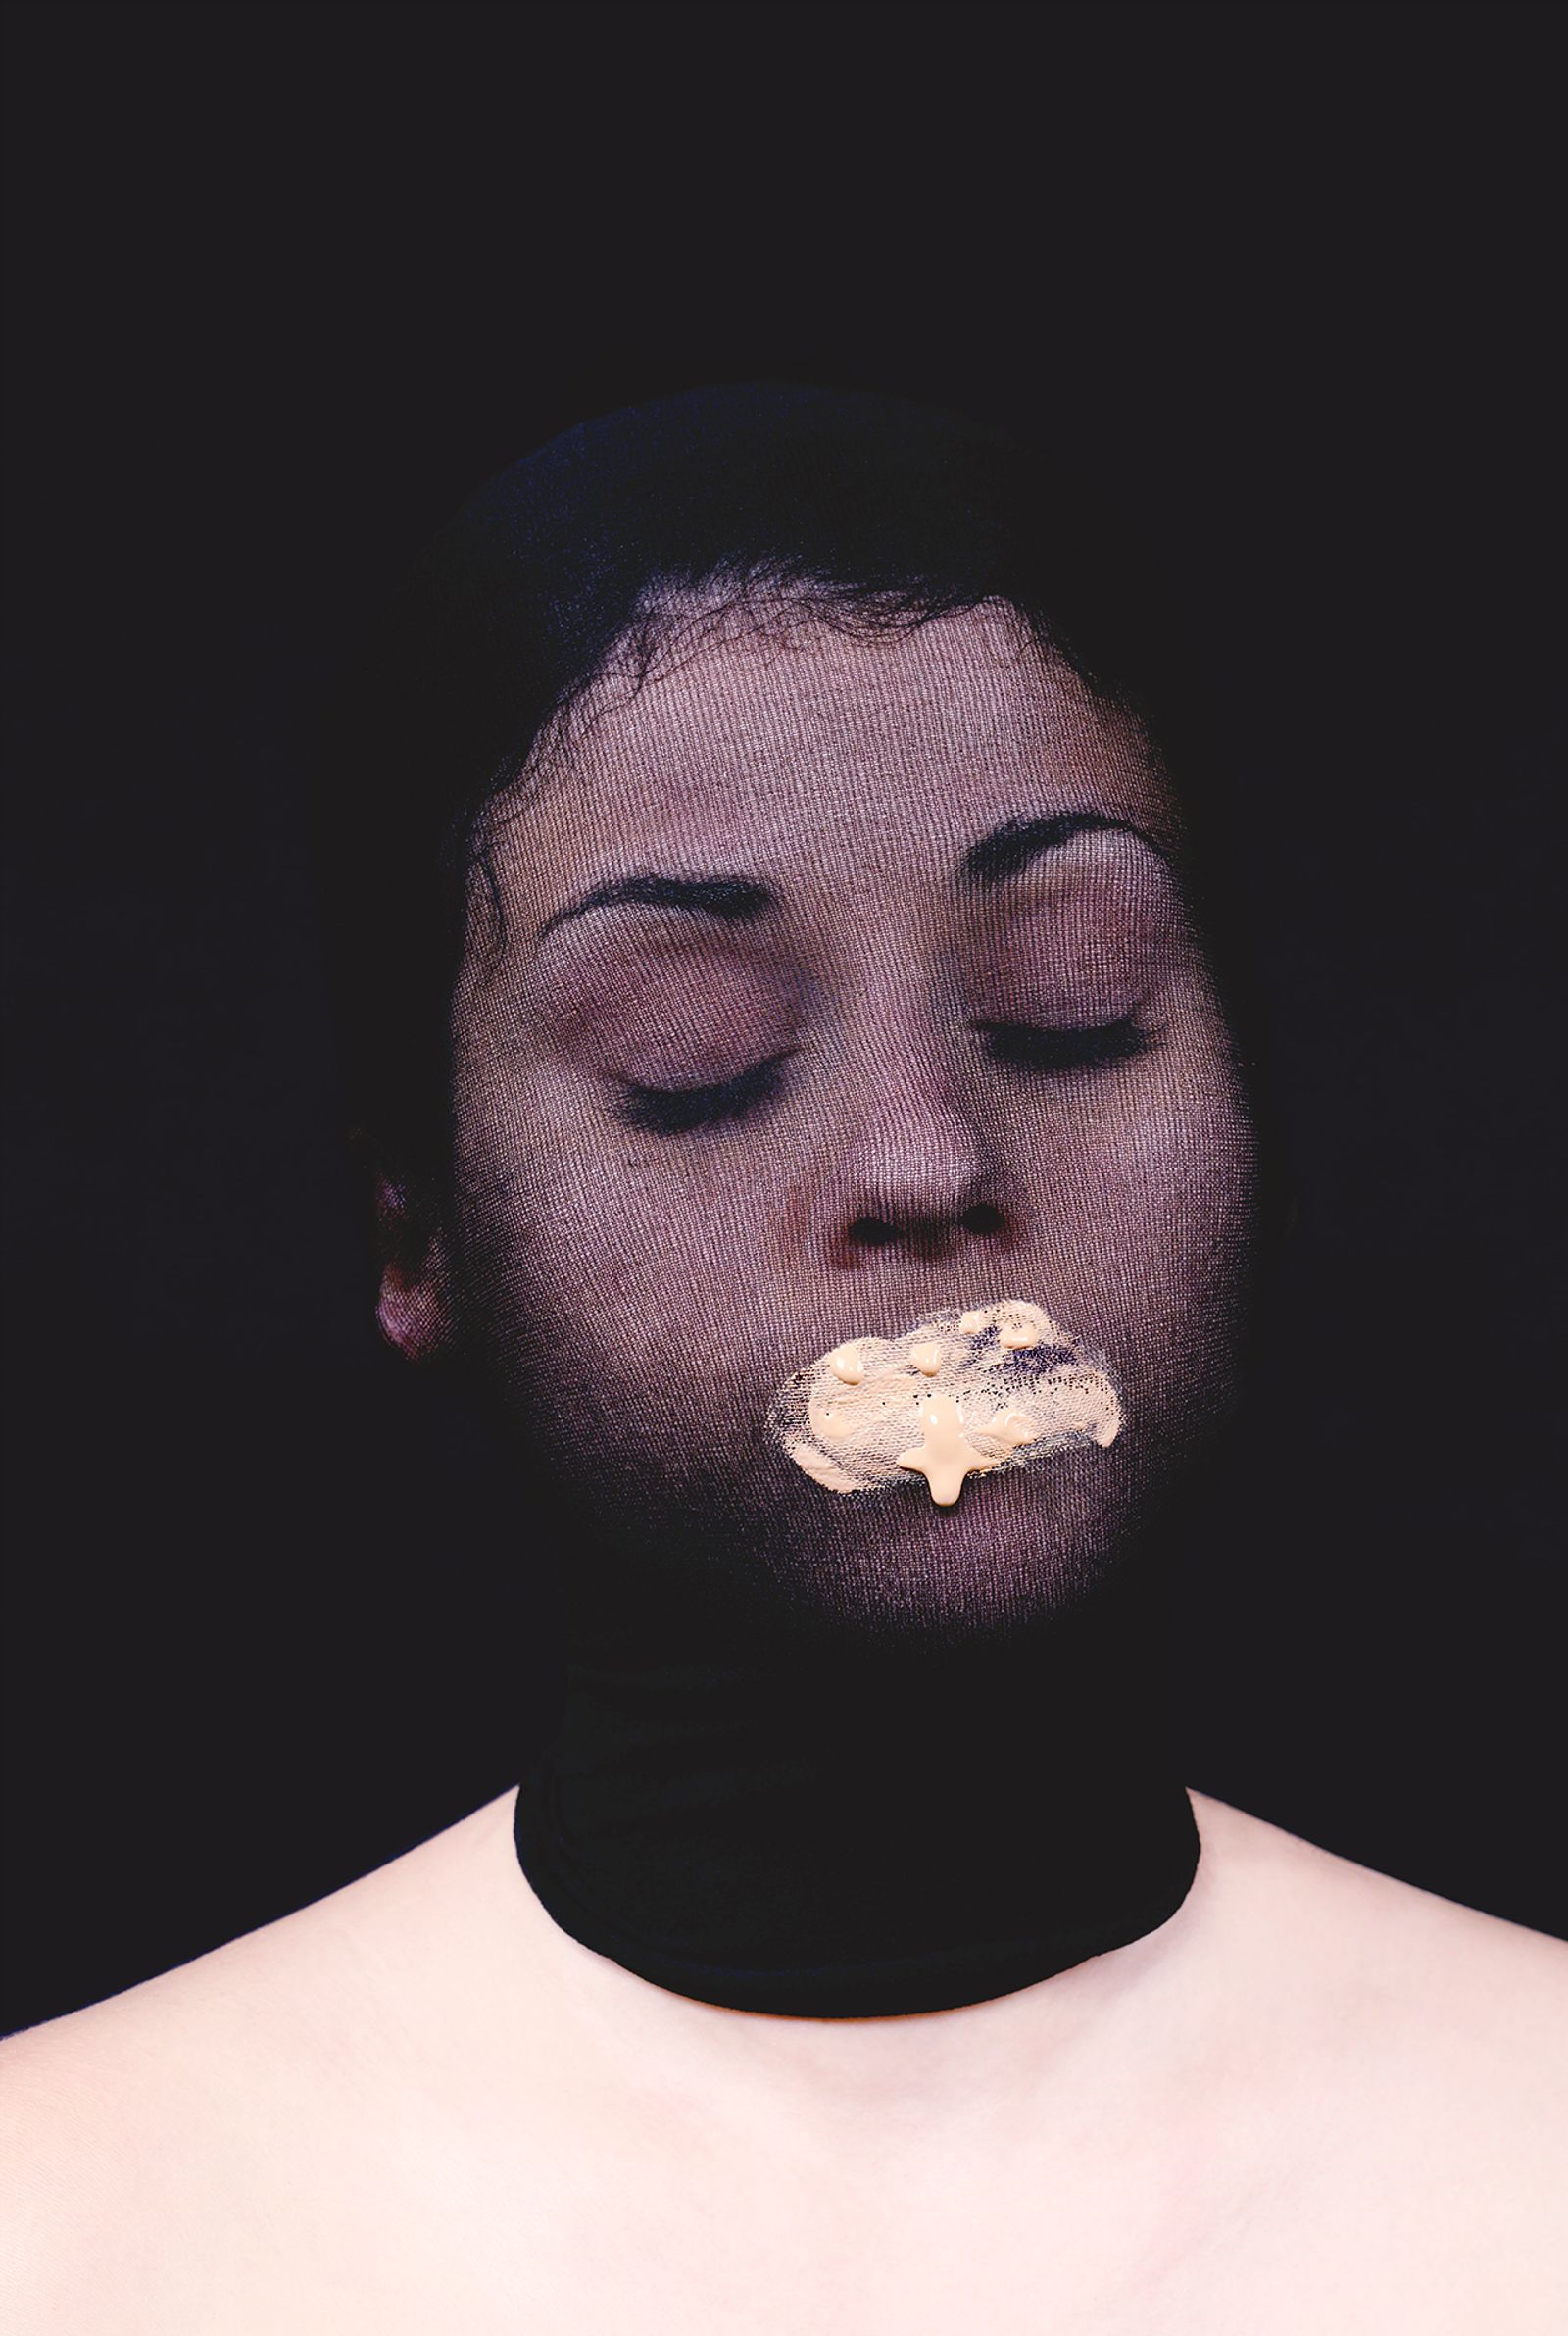 © Ana Espinal - Painted Face, Archival inkjet print, 20 x 30 in. or smaller size.